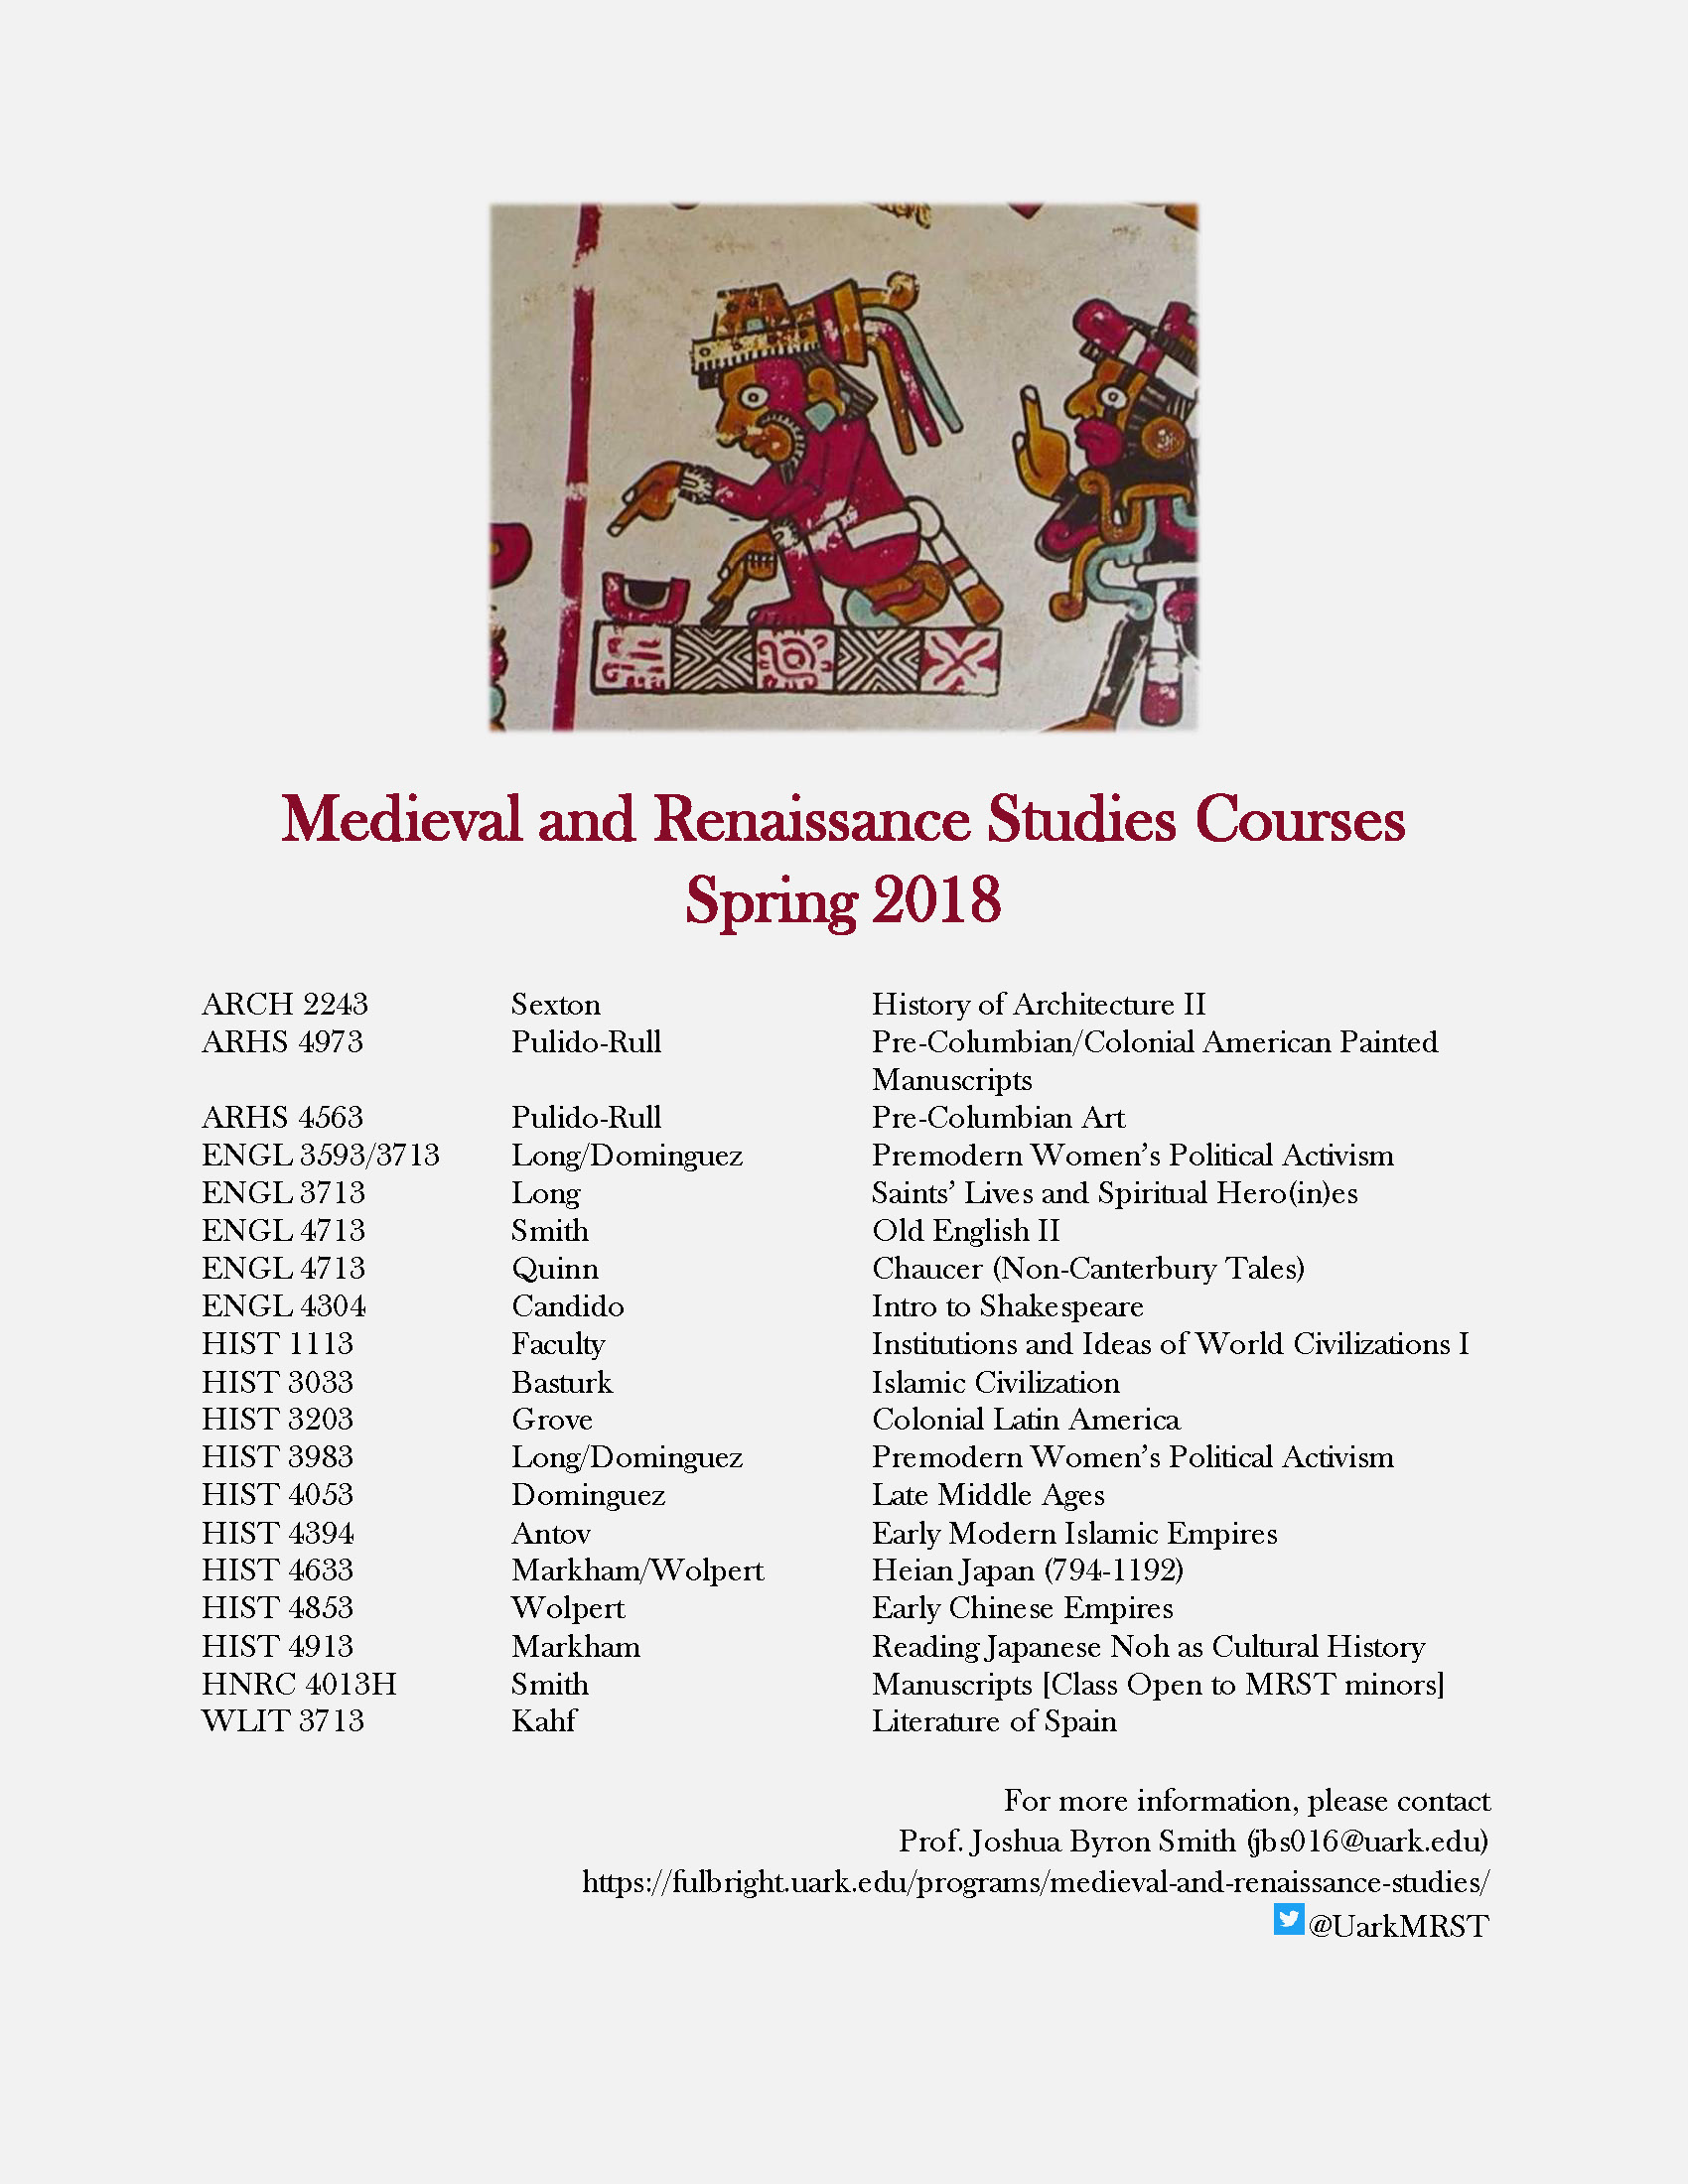 MRST Summer and Fall 2017 Courses